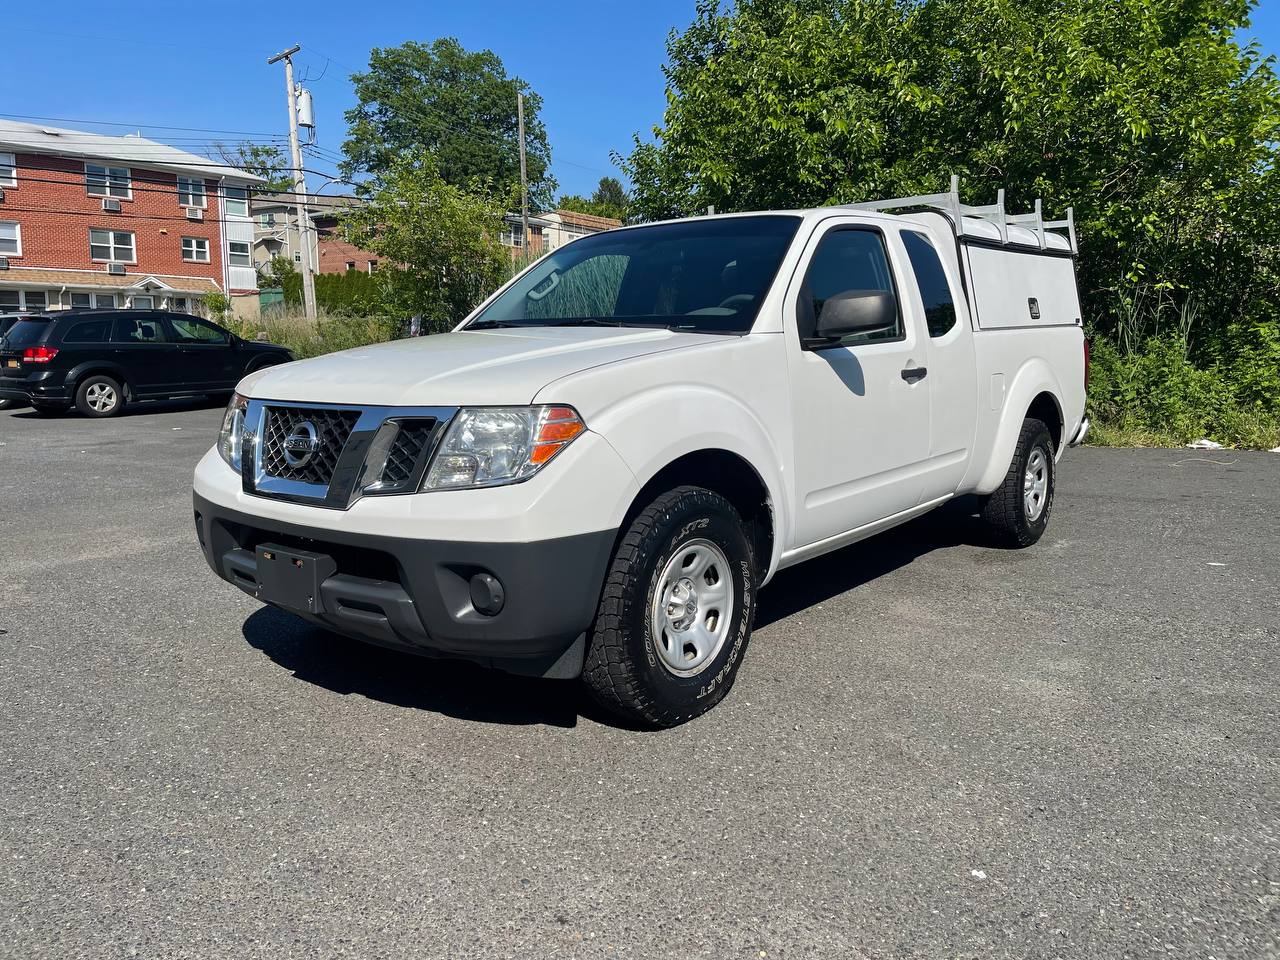 Used Car - 2014 Nissan Frontier S King Cab for Sale in Staten Island, NY